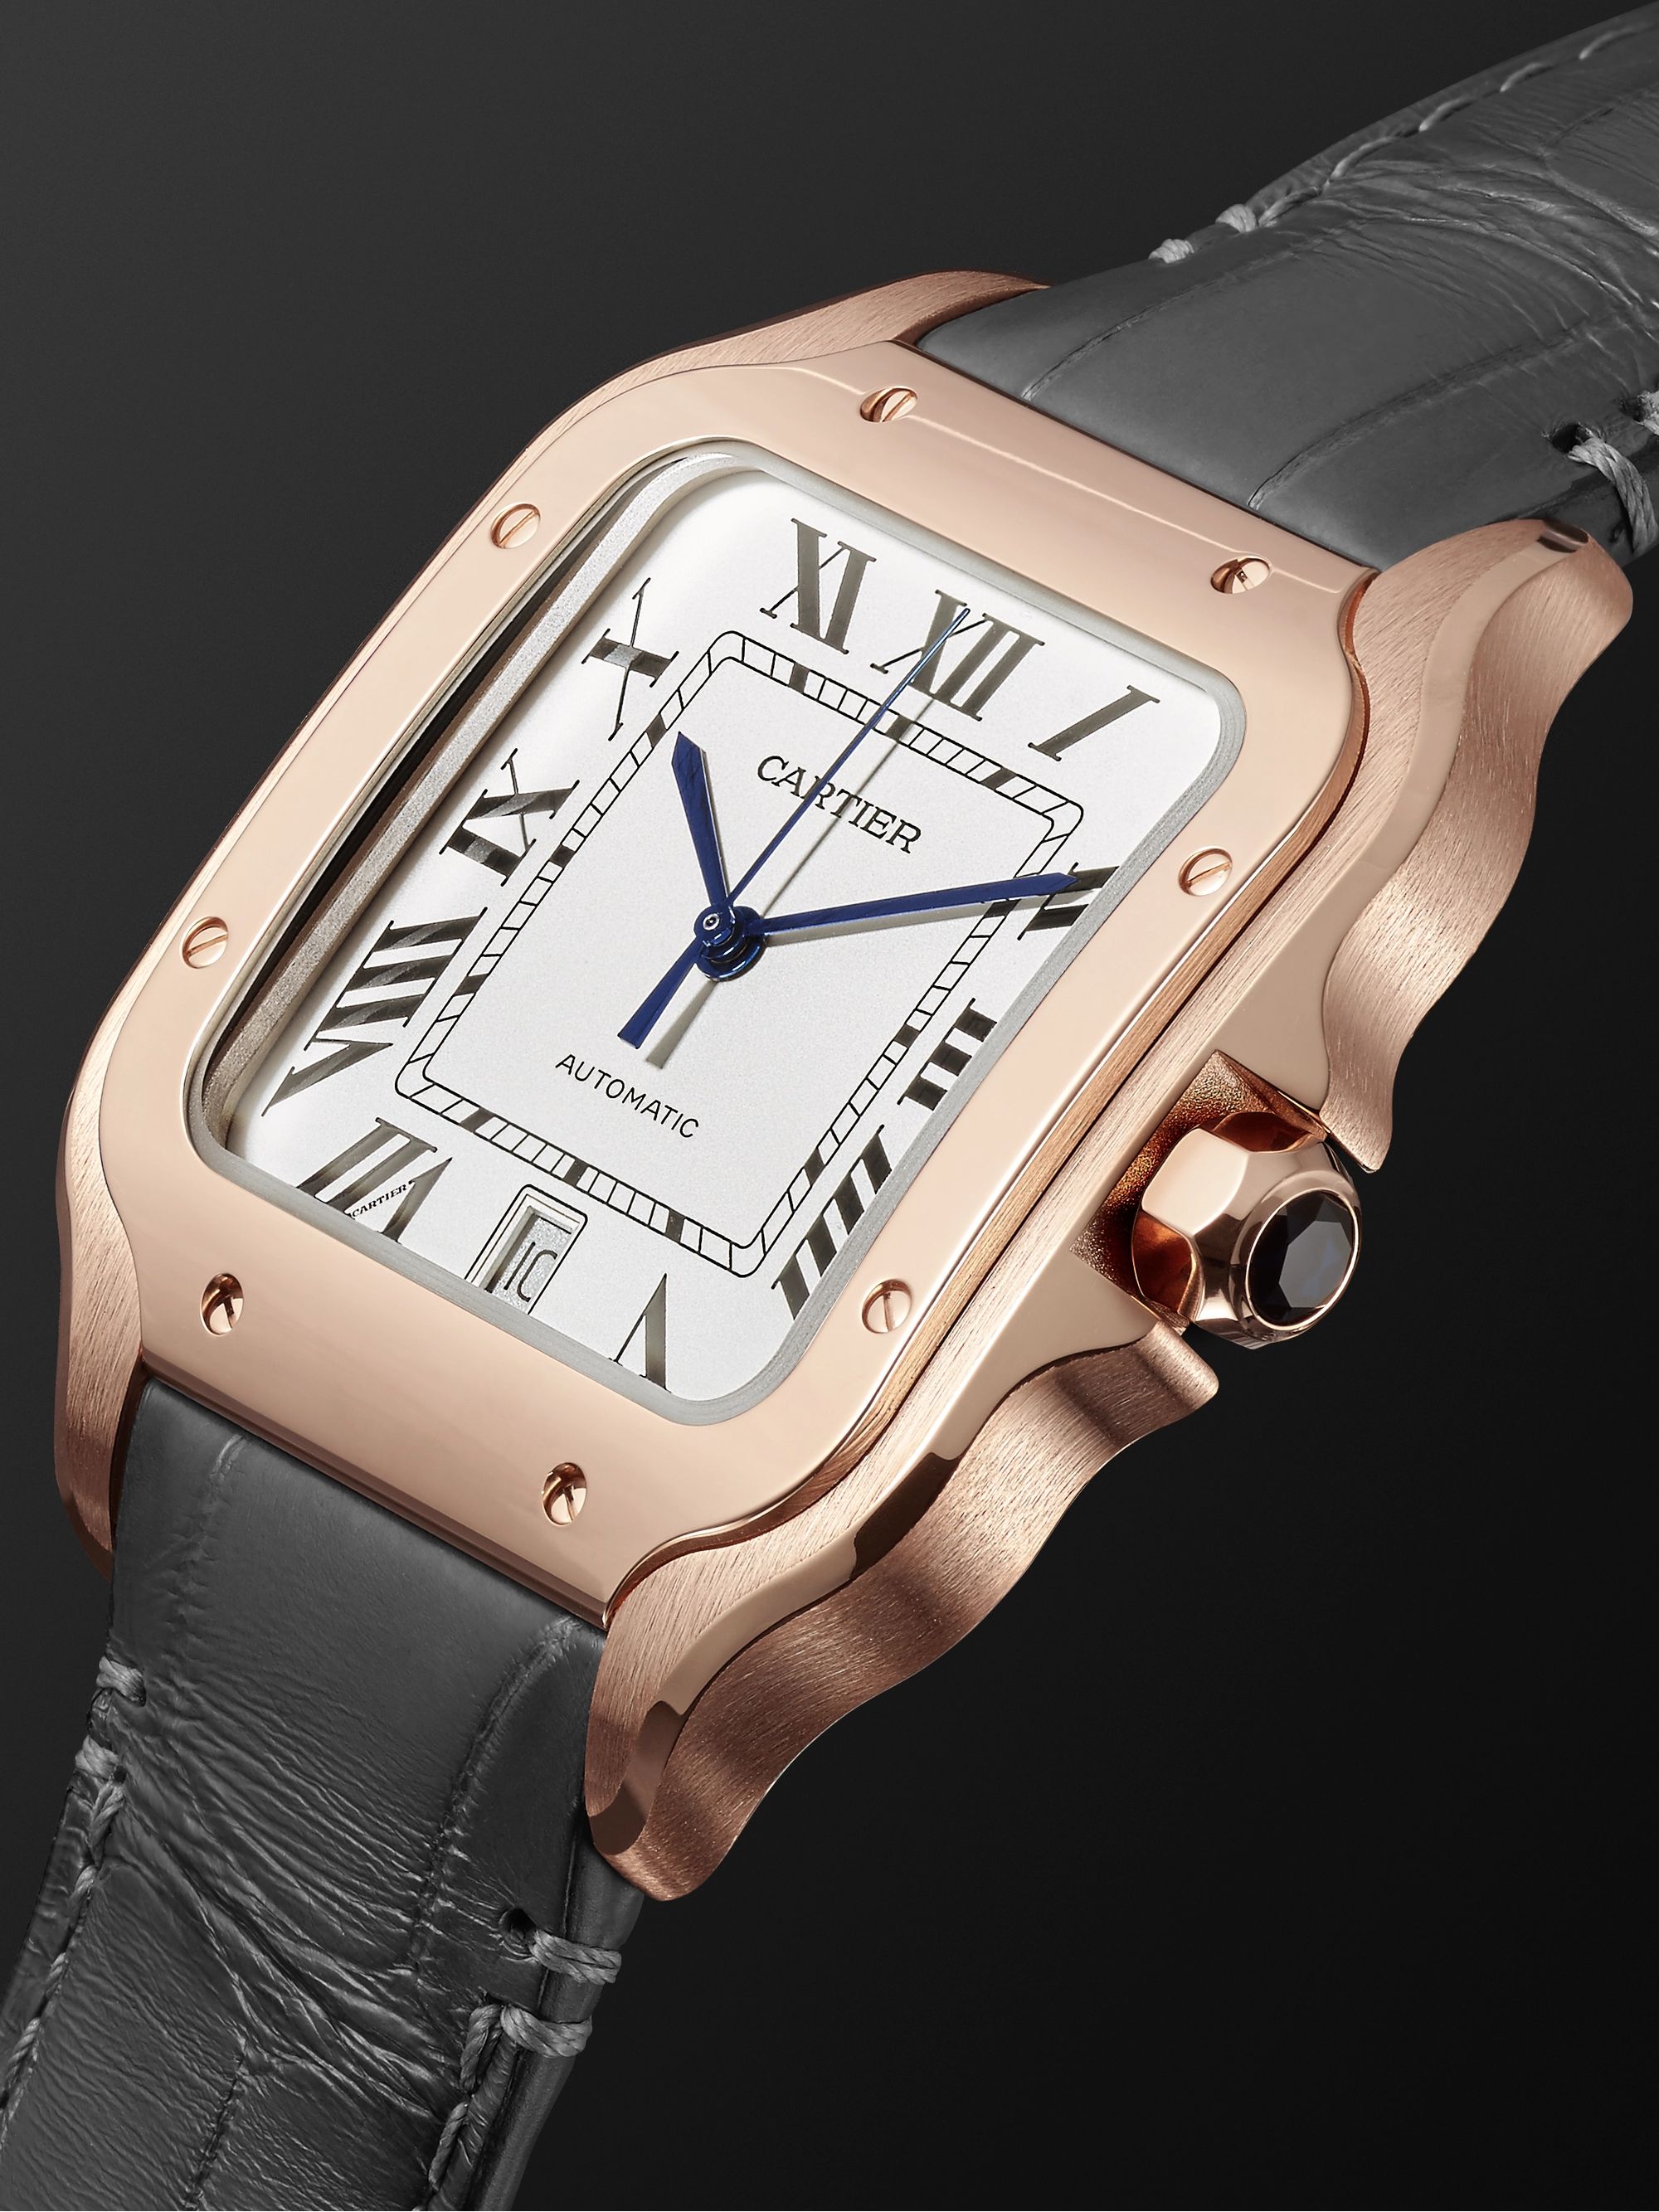 CARTIER Santos Automatic 39.8mm 18-Karat Rose Gold Interchangeable Alligator and Leather Watch, Ref. No. WGSA0011